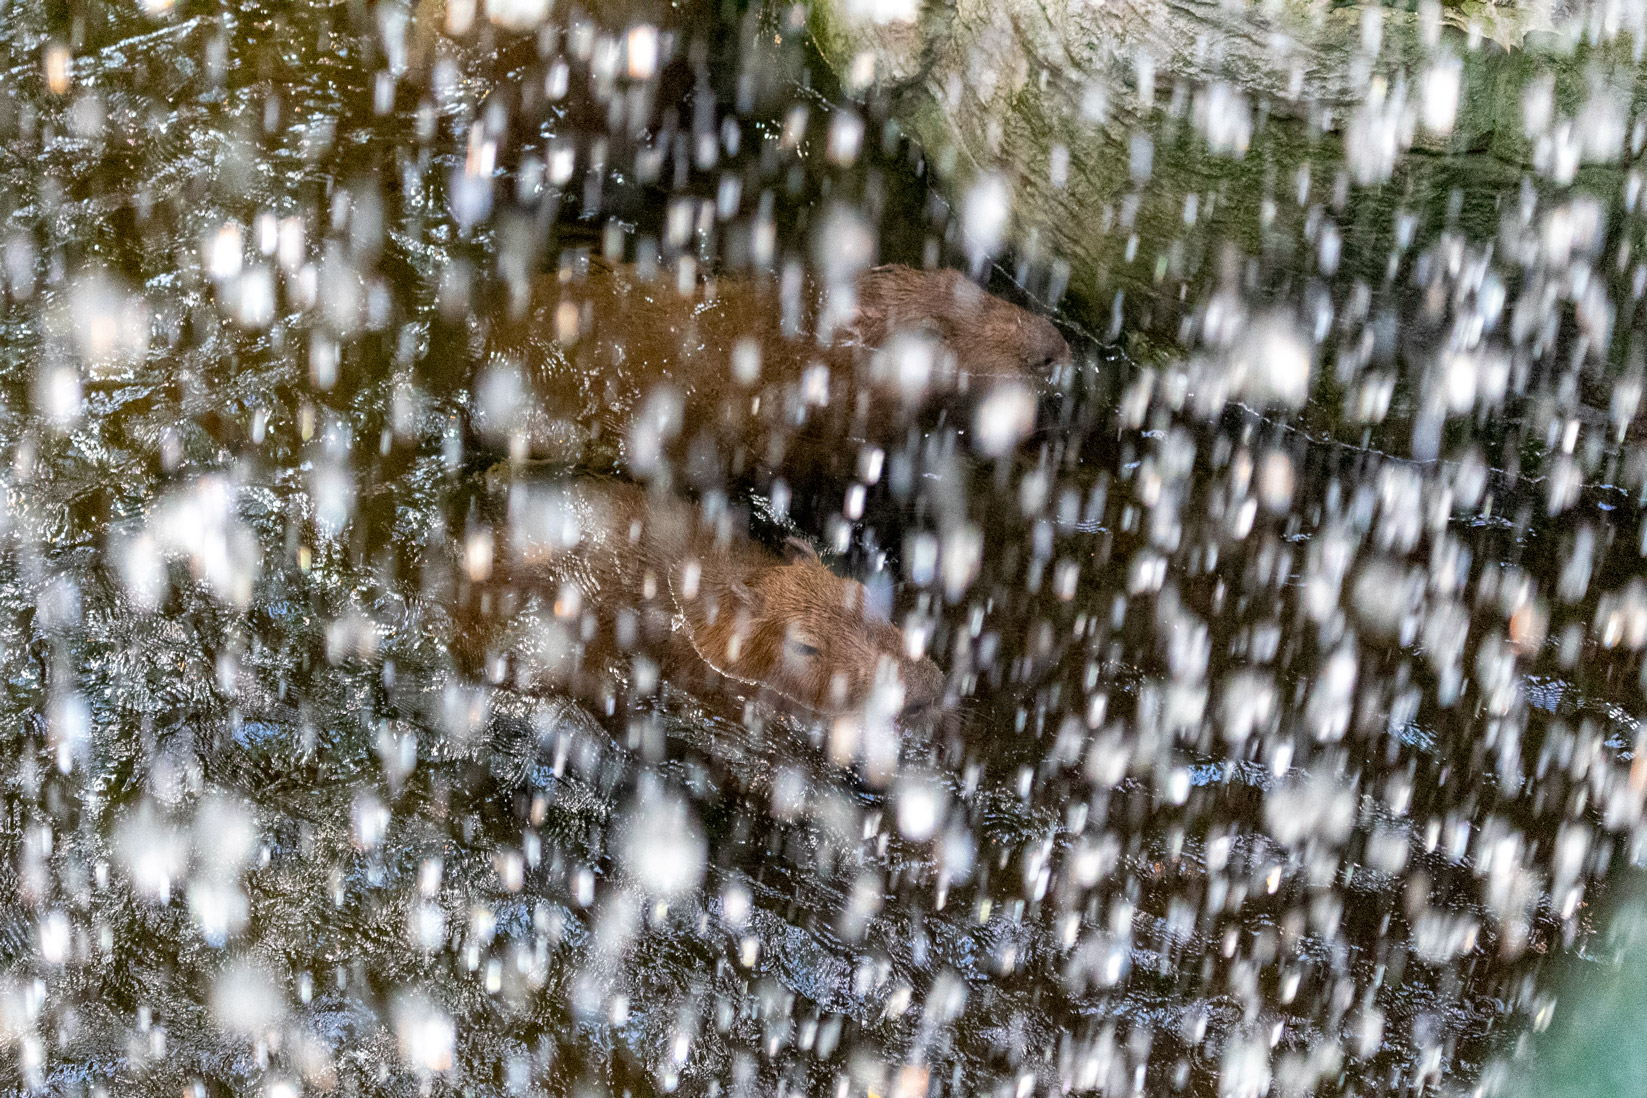 Two capybaras in the water, viewed from behind a waterfall